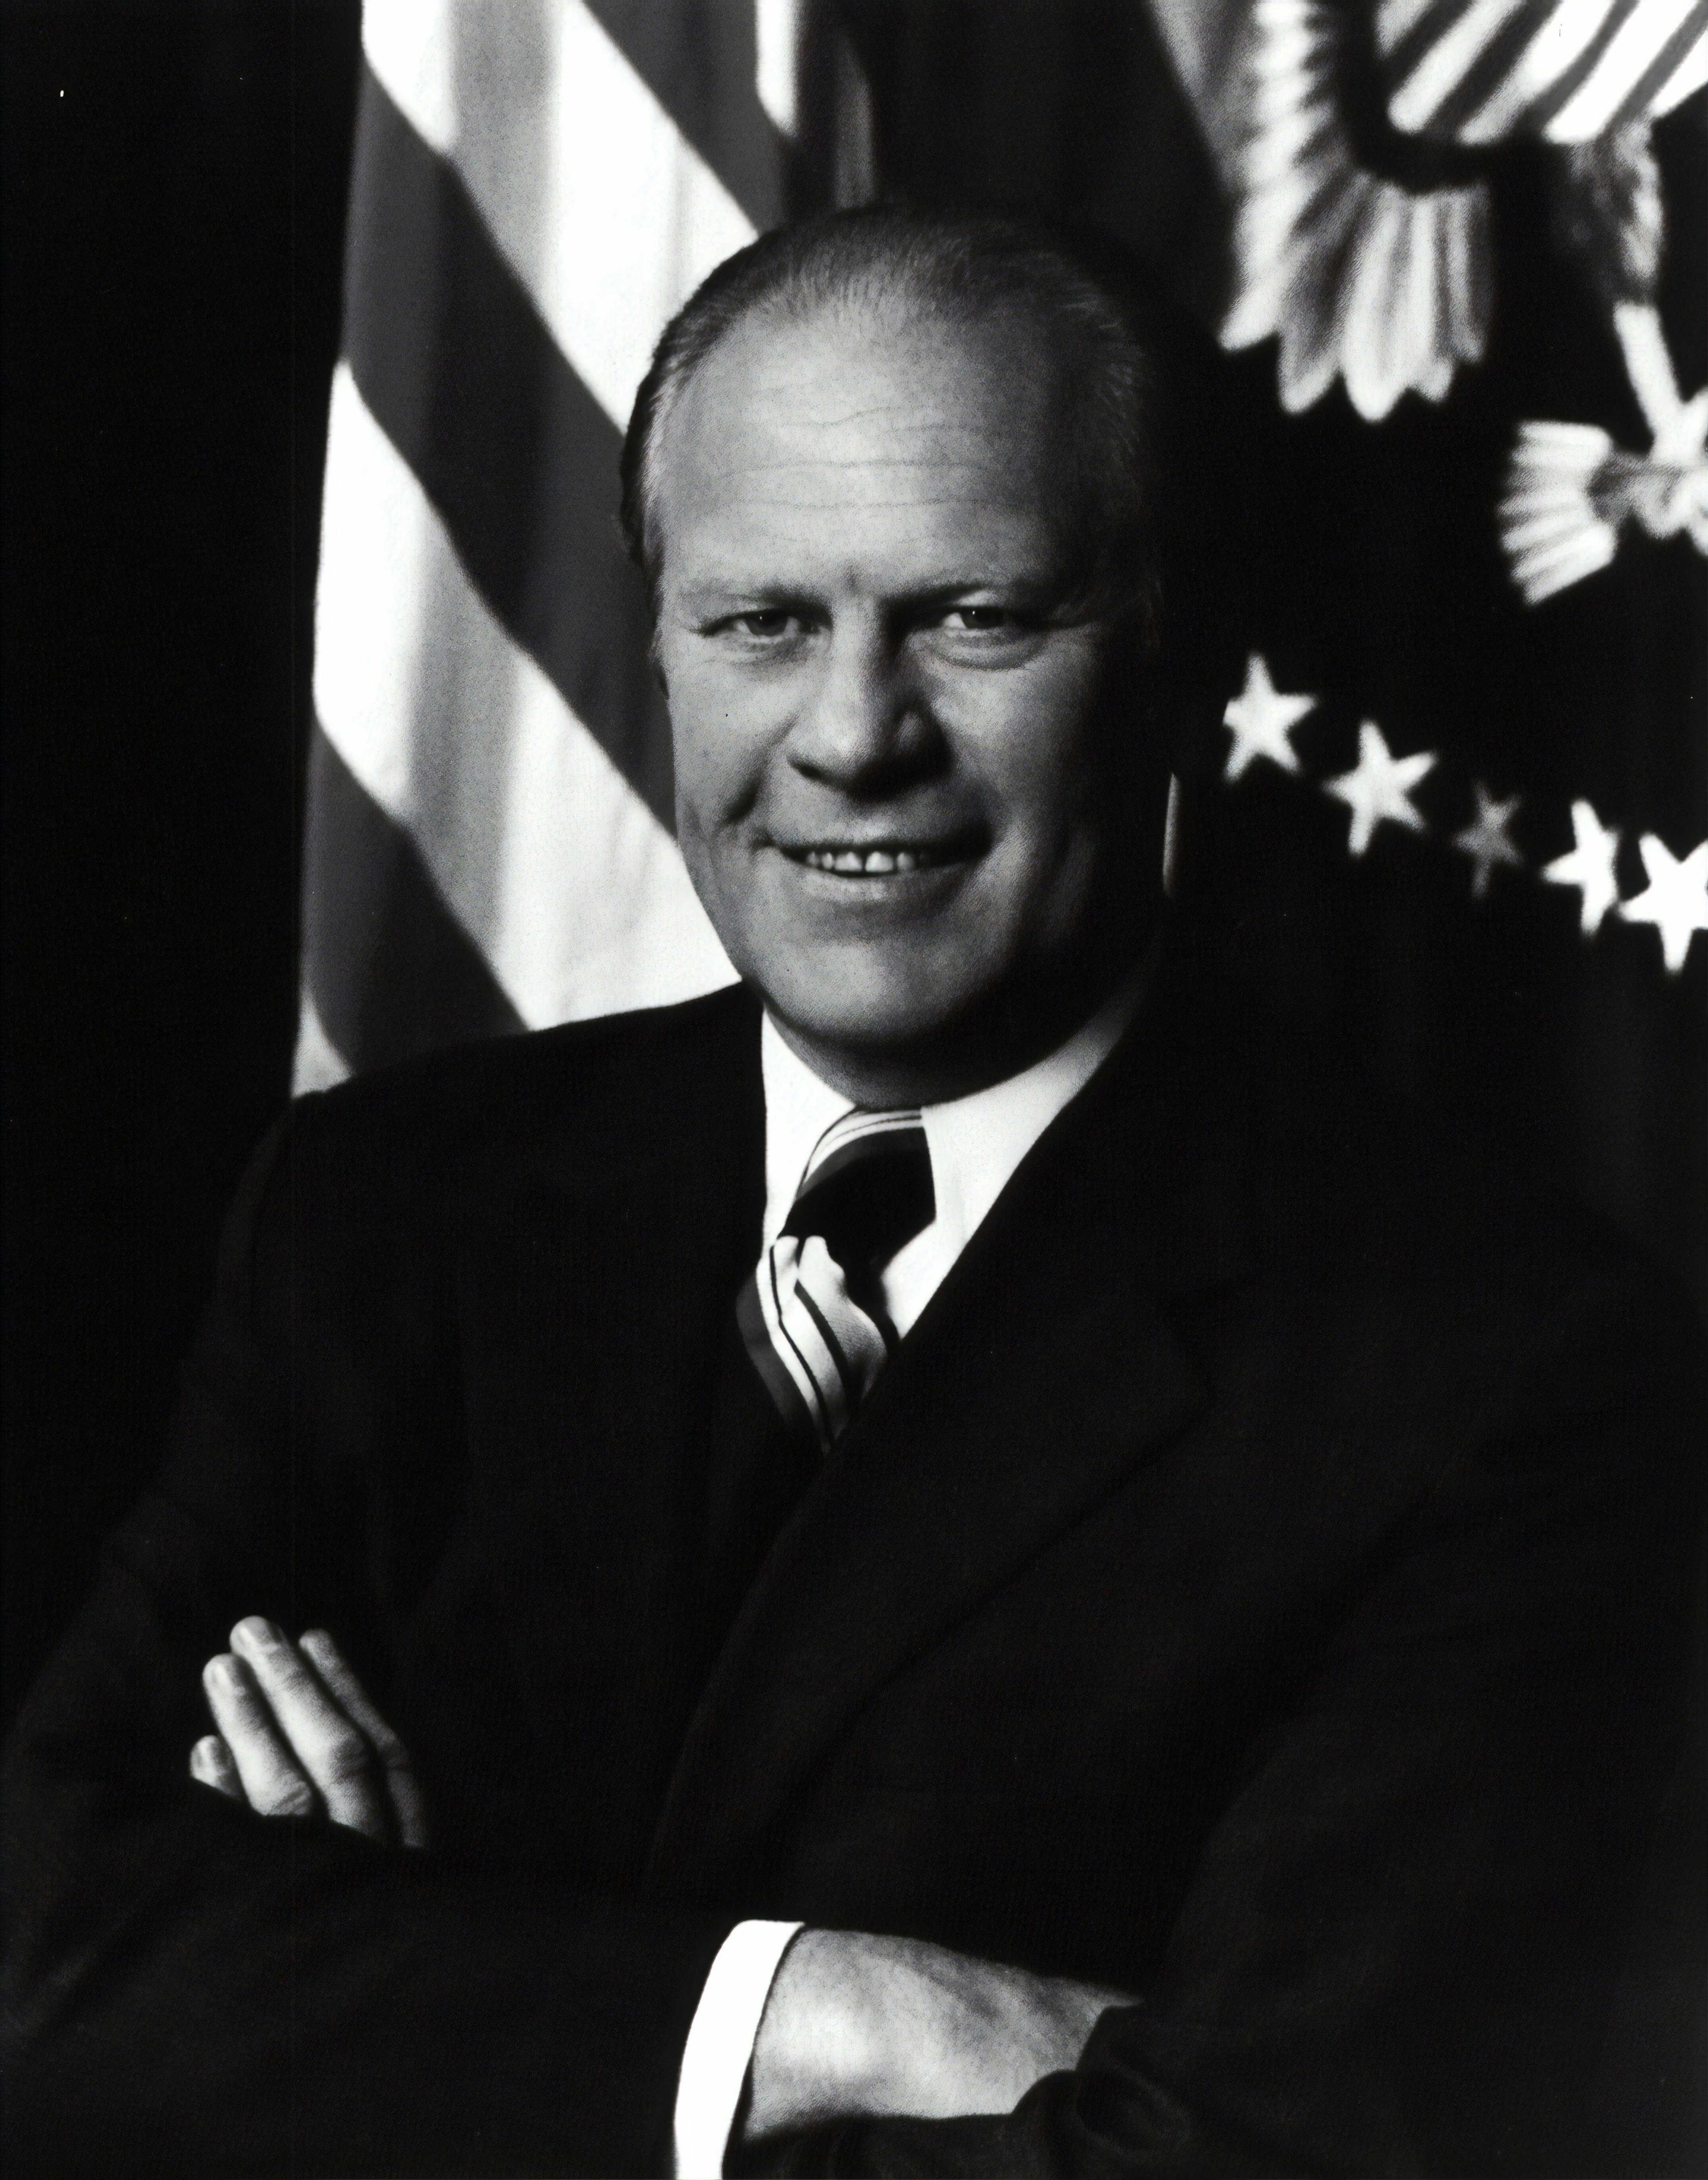 [Gerald R. Ford, half-length portrait, facing front, with arms crossed]. Photograph from the Presidential File Collection, 1974. Library of Congress Prints & Photographs Division.

https://www.loc.gov/item/96522670/